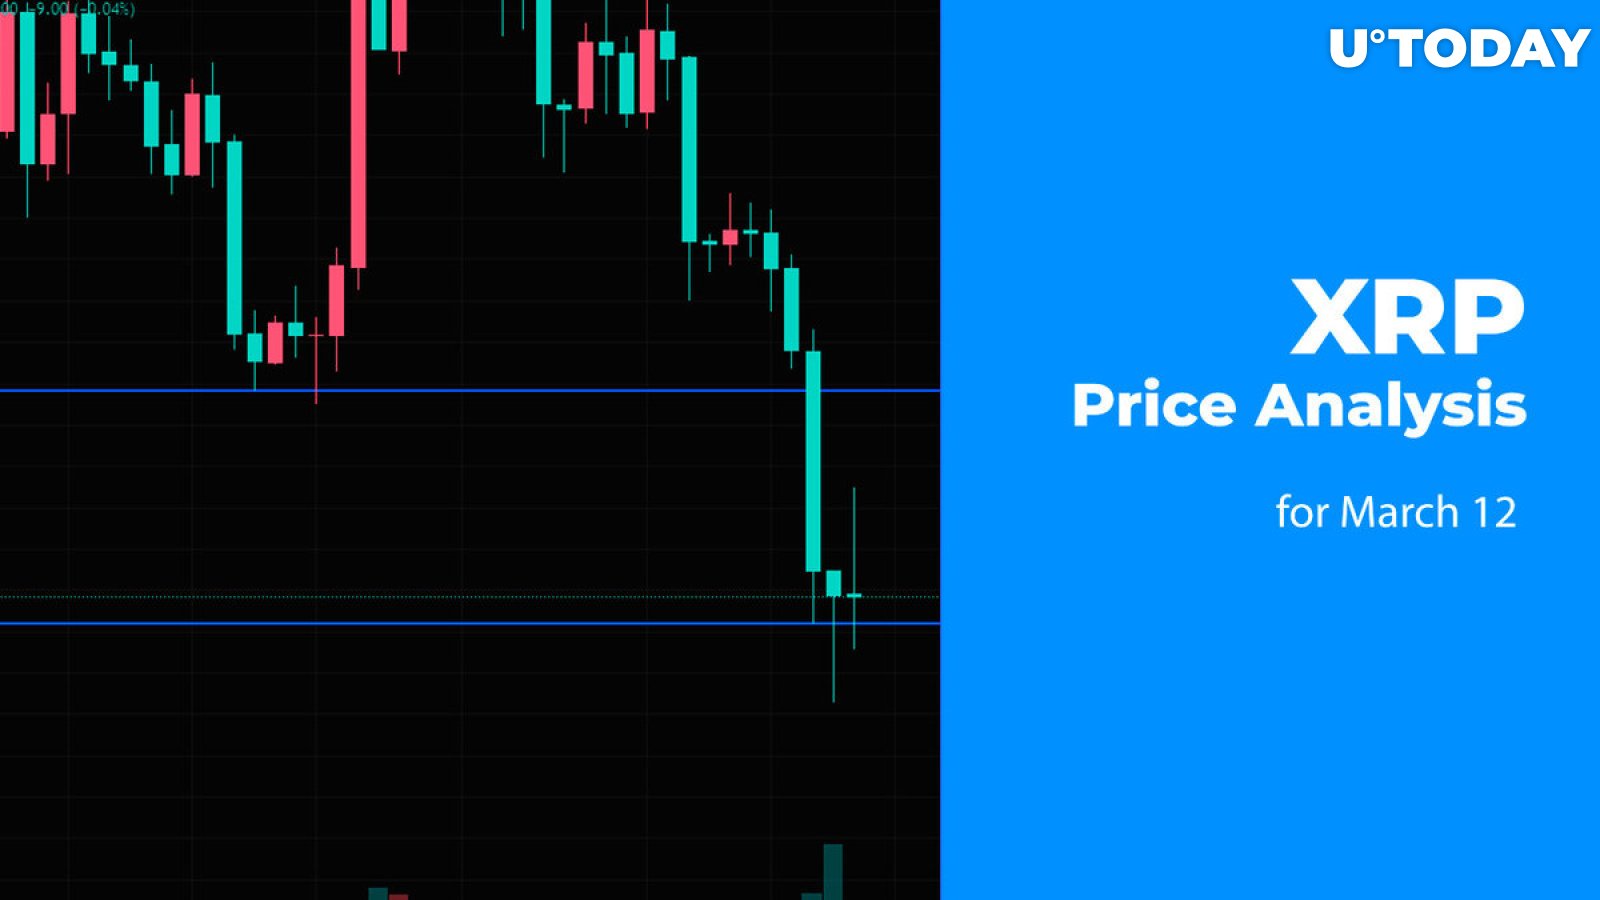 XRP Price Analysis for March 12